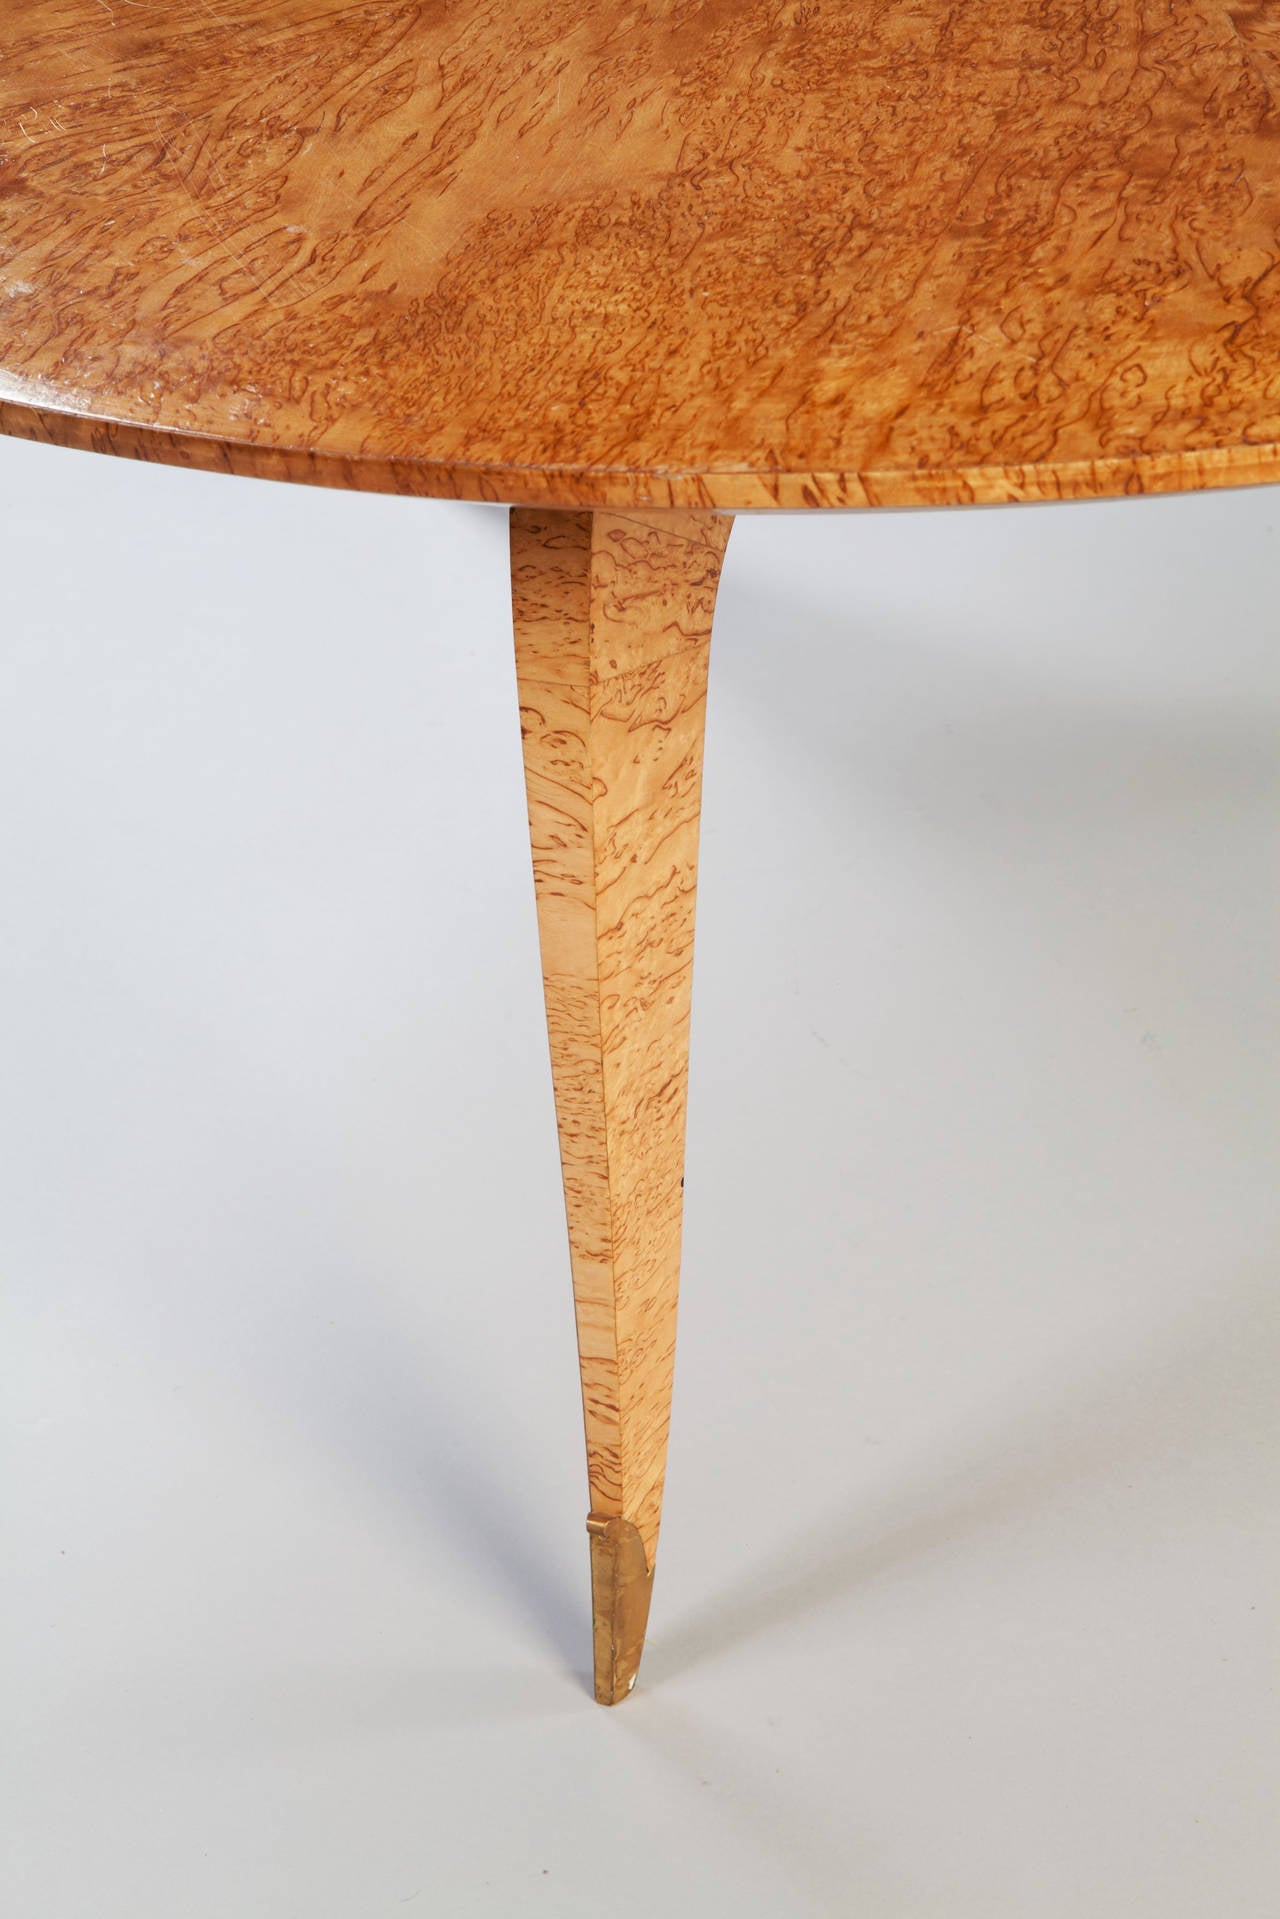 An elegant early twentieth century burr maple veneered circular low coffee table, the three tapering sabre legs terminating in gilt bronze sabots. By Jean Pascaud.

Jean Pascaud was born in Rouen in 1903. He took a degree in engineering from the